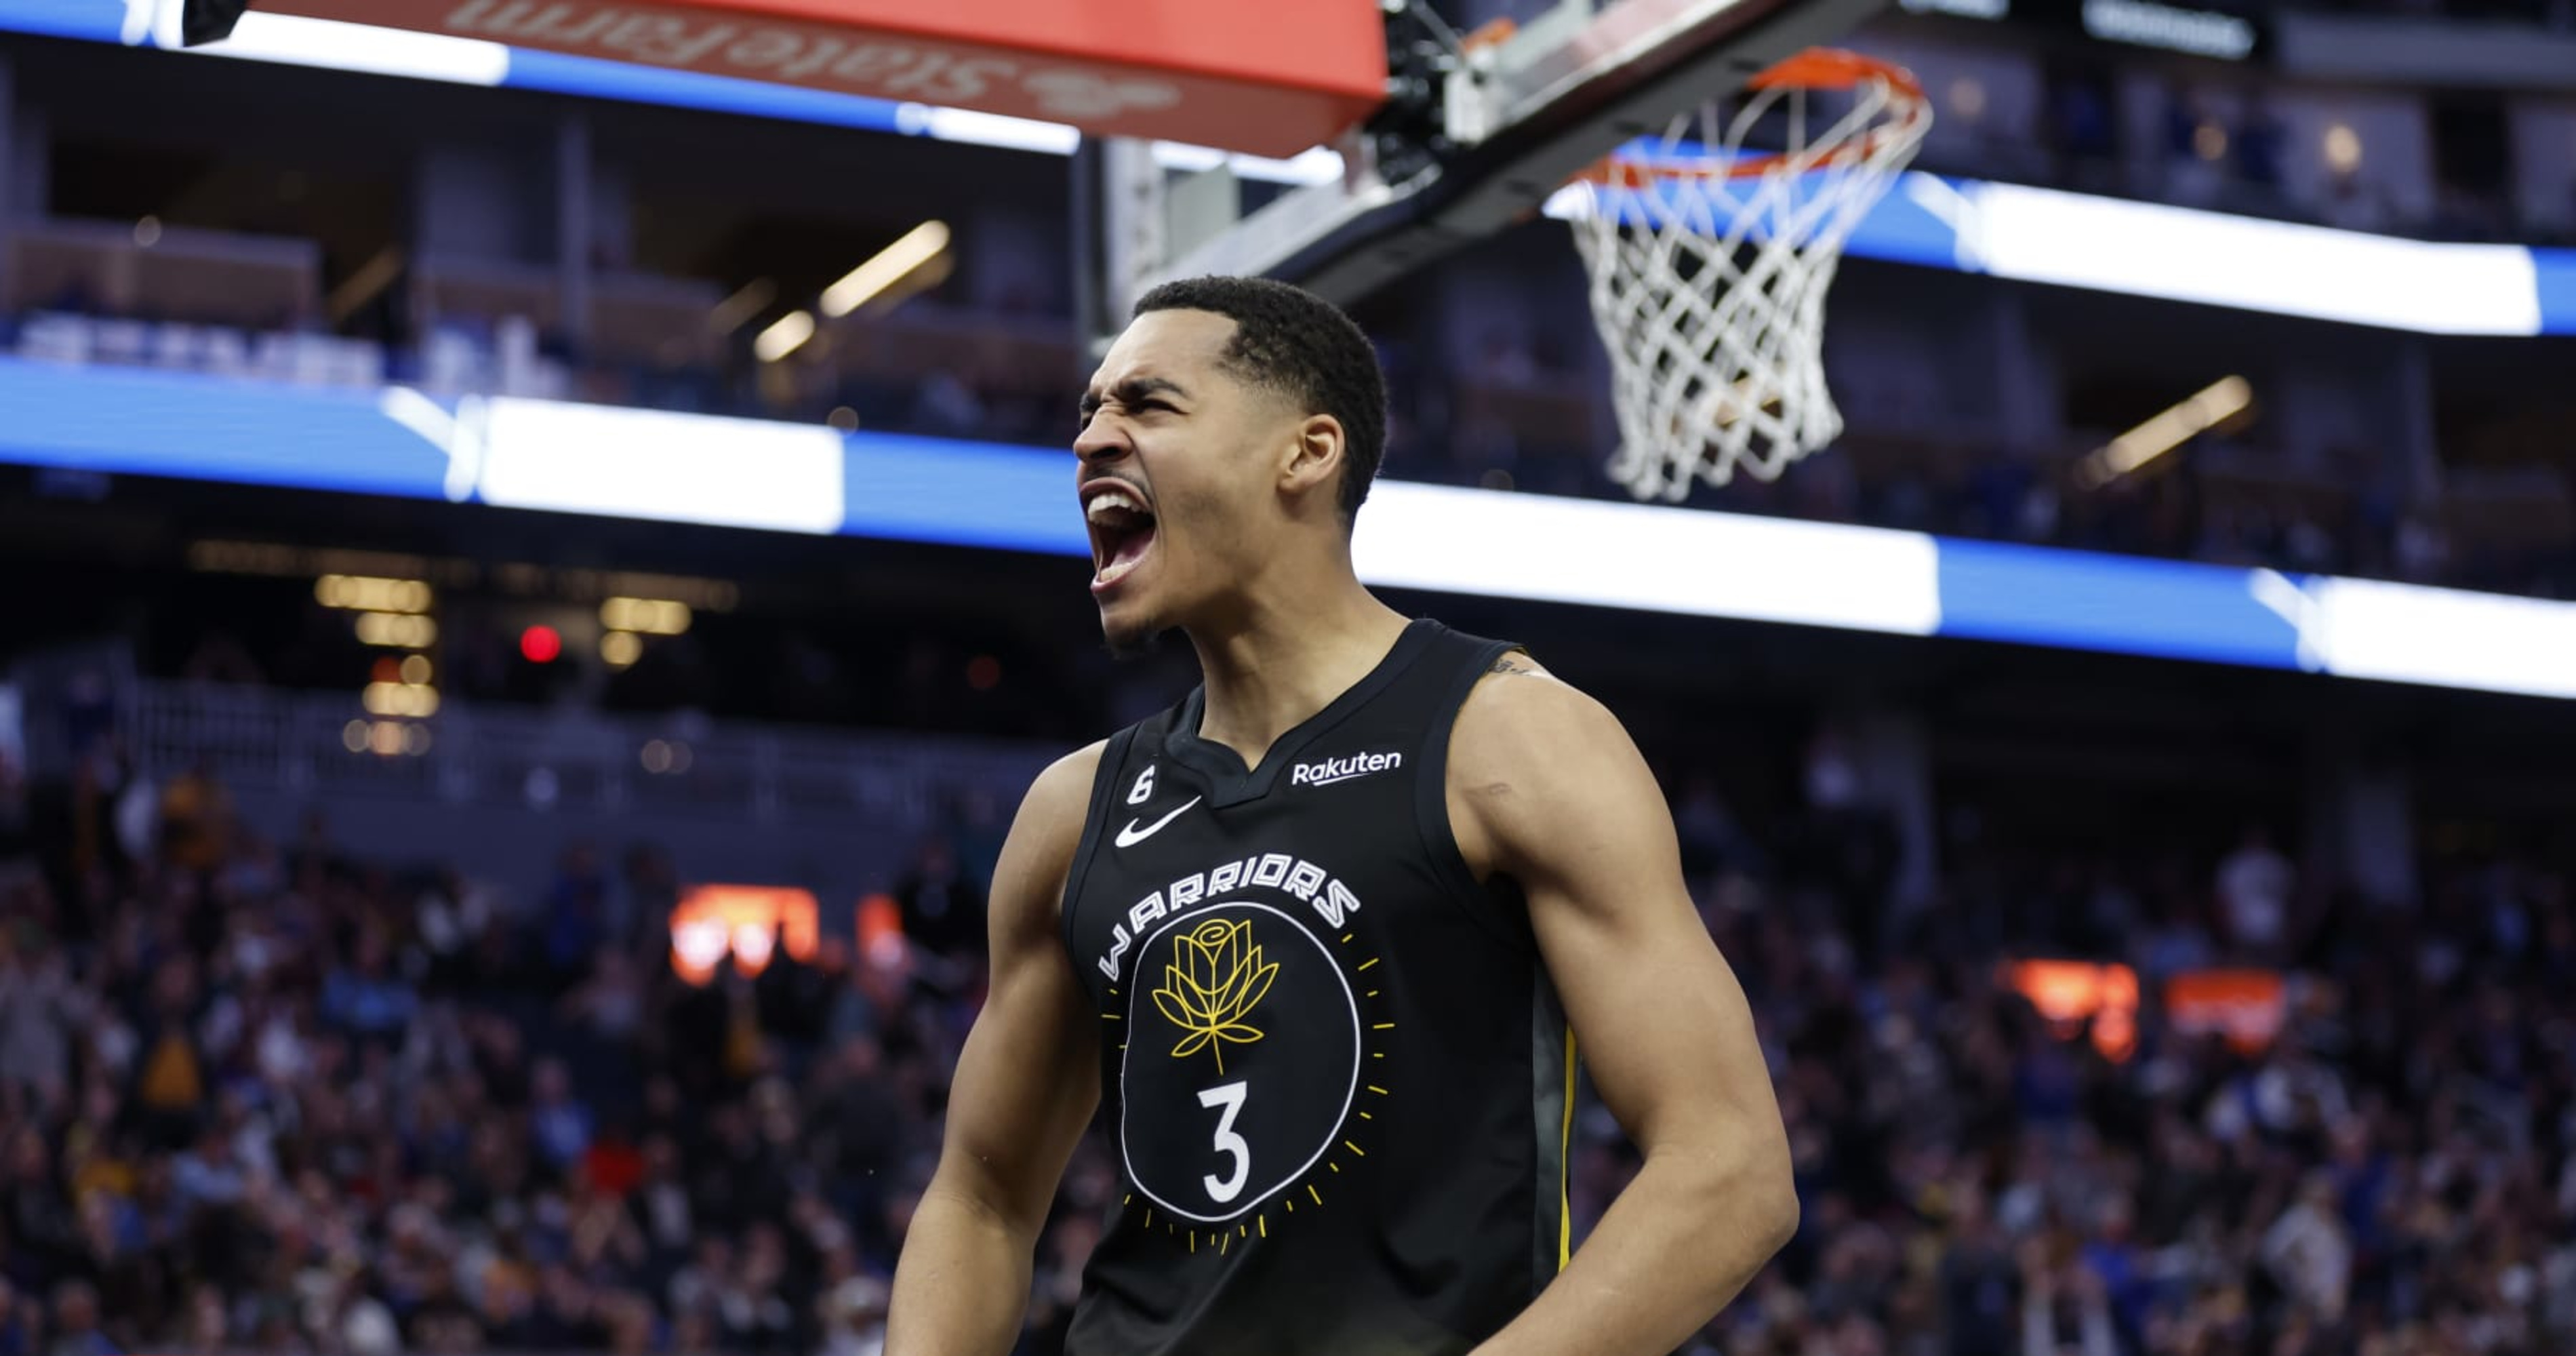 Jordan Poole Touted for Putting Warriors 'on His Back' with Clutch Play